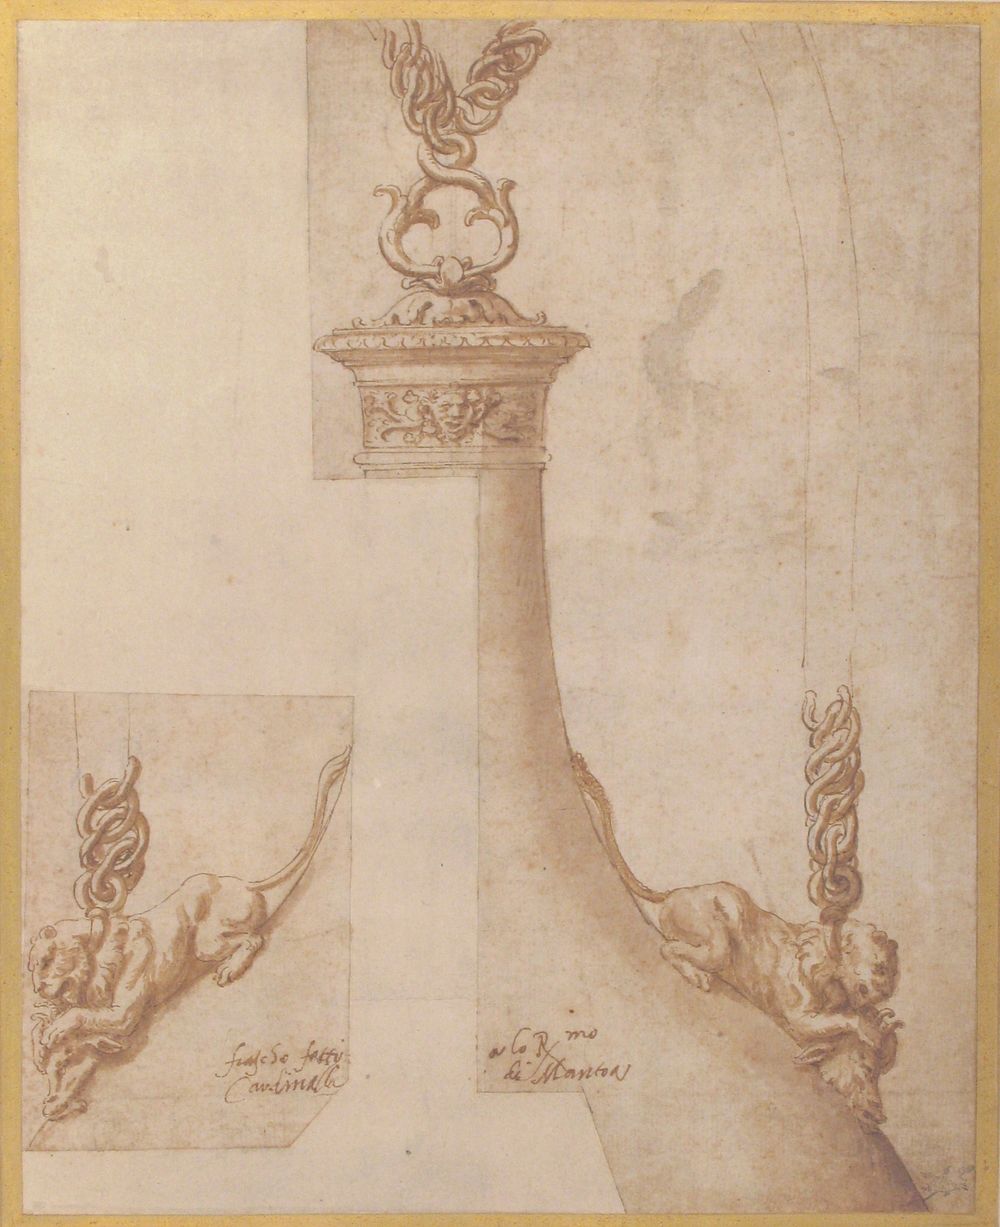 Design for a Flask with Chain Handles by Giulio Romano